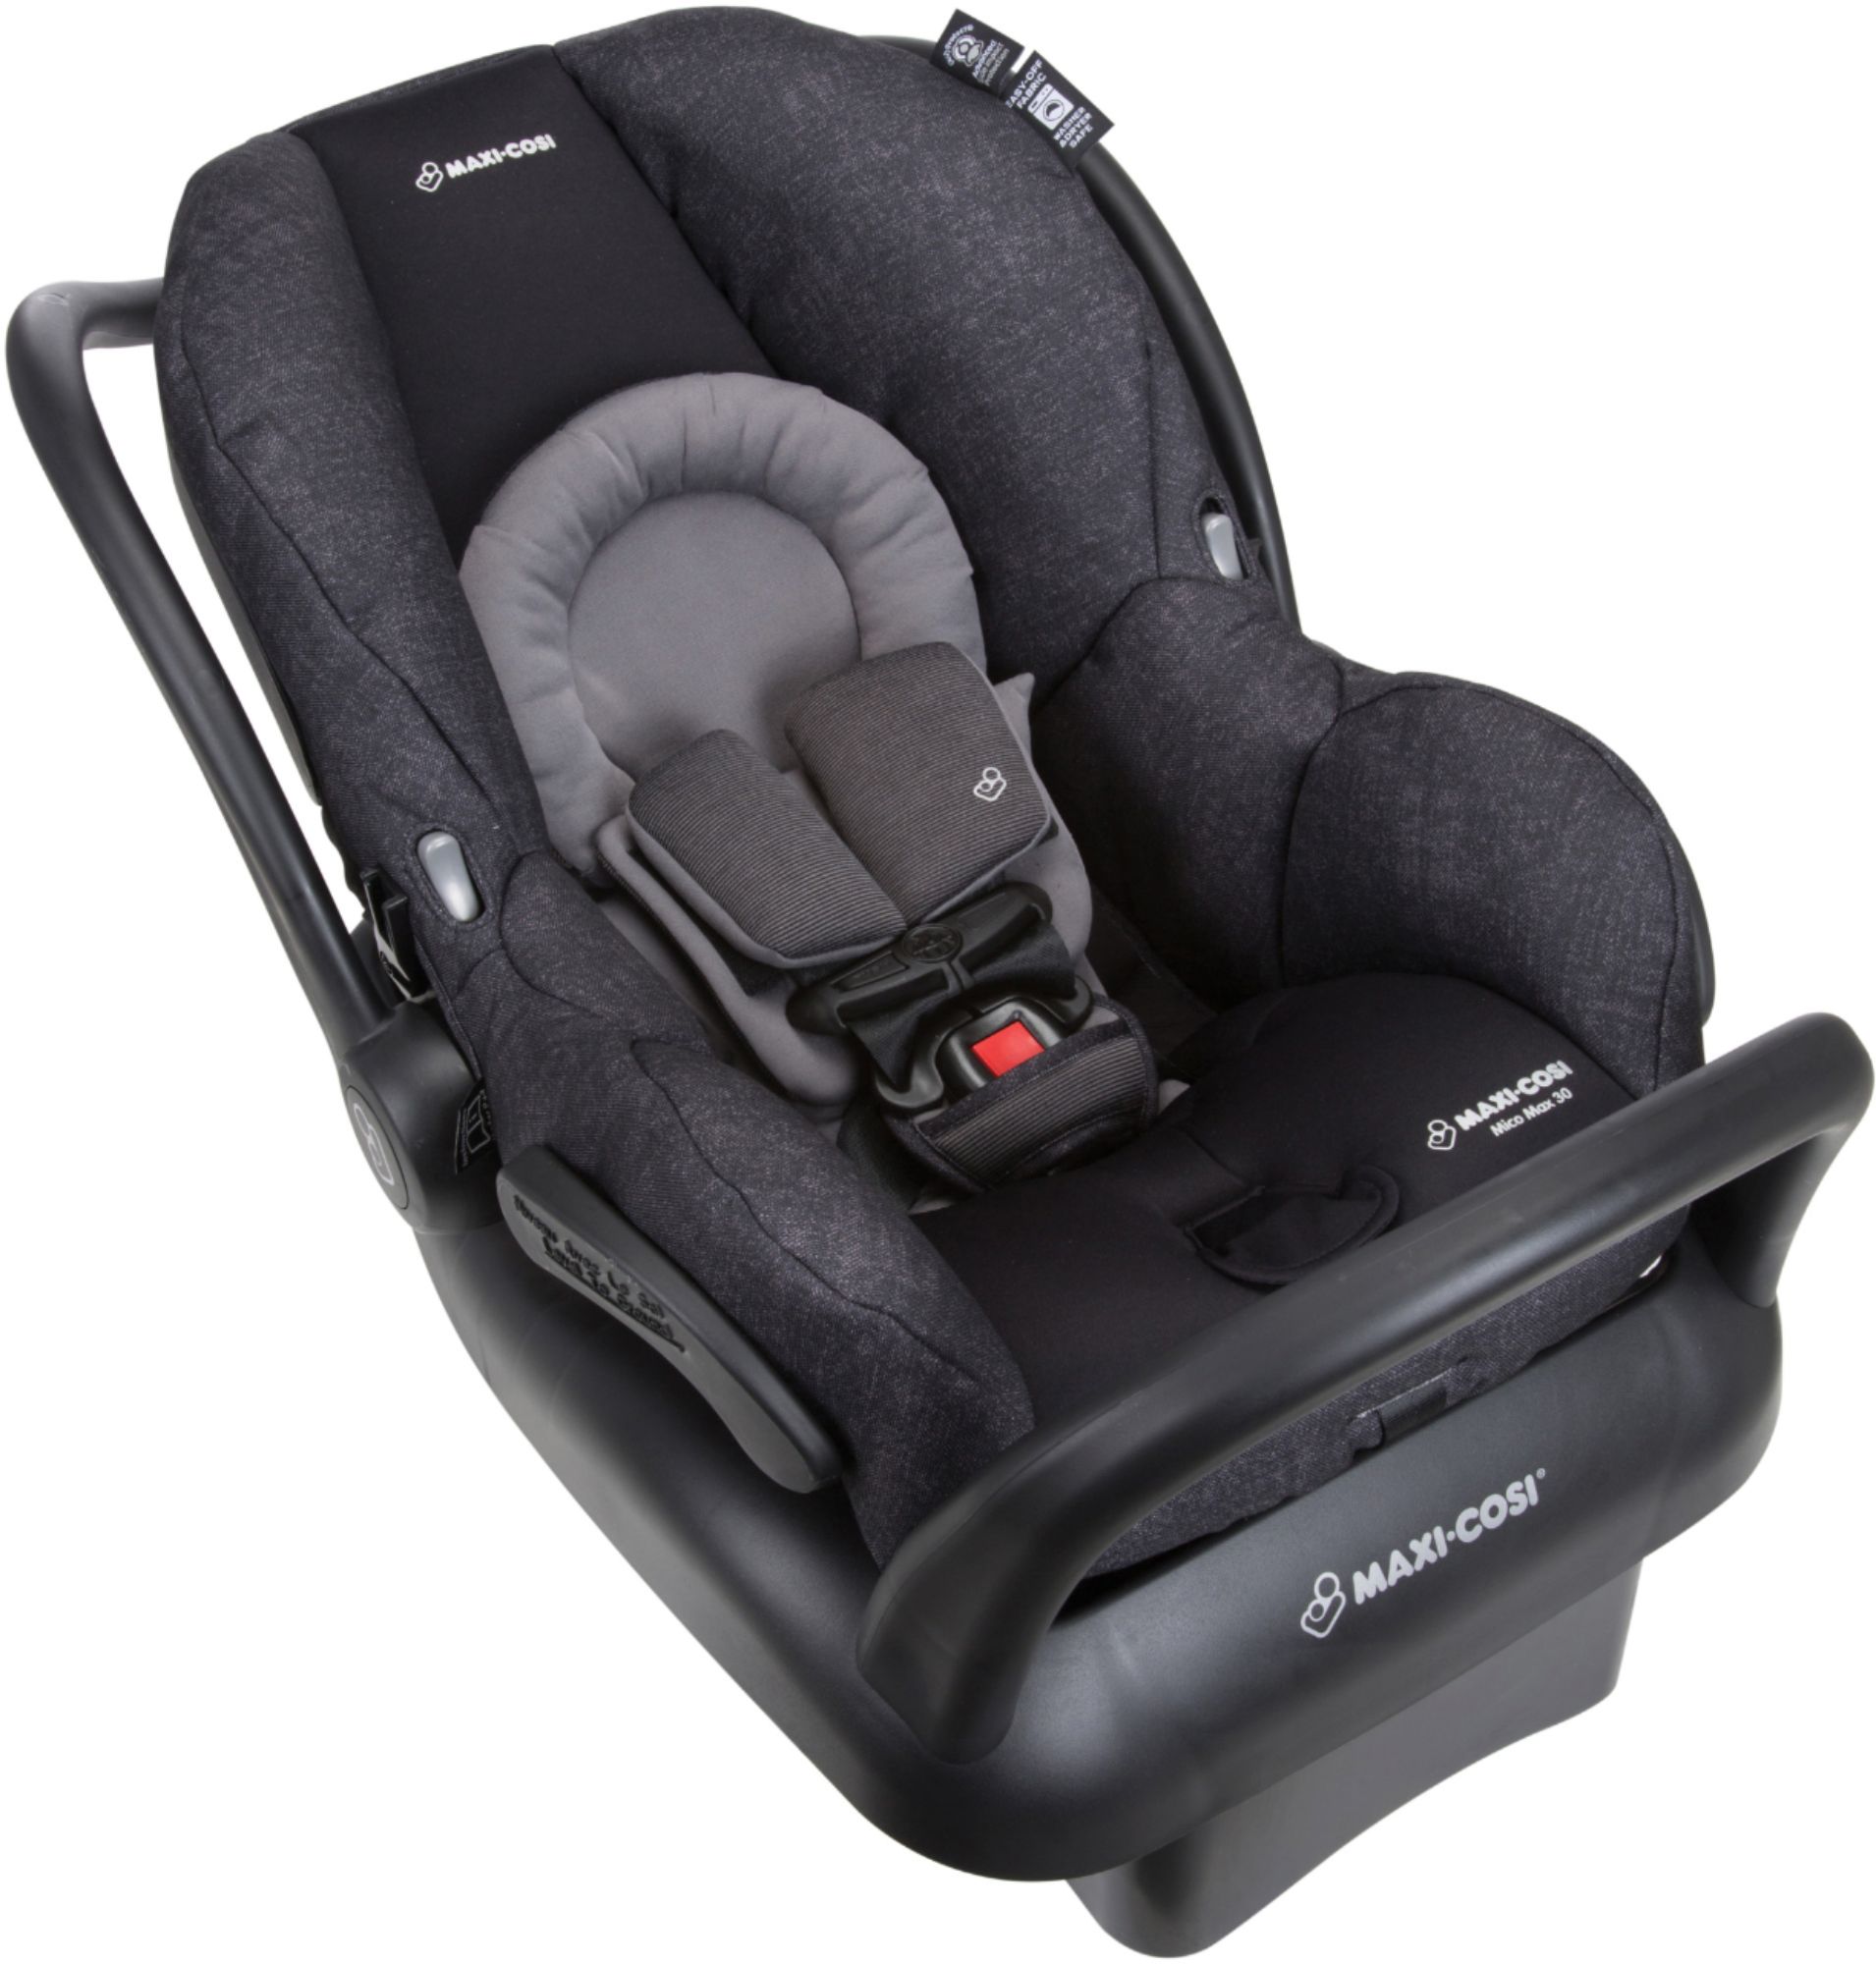 misdrijf Consequent Encyclopedie Best Buy: Maxi-Cosi Mico Max 30 Infant Car Seat Black IC302ETKA